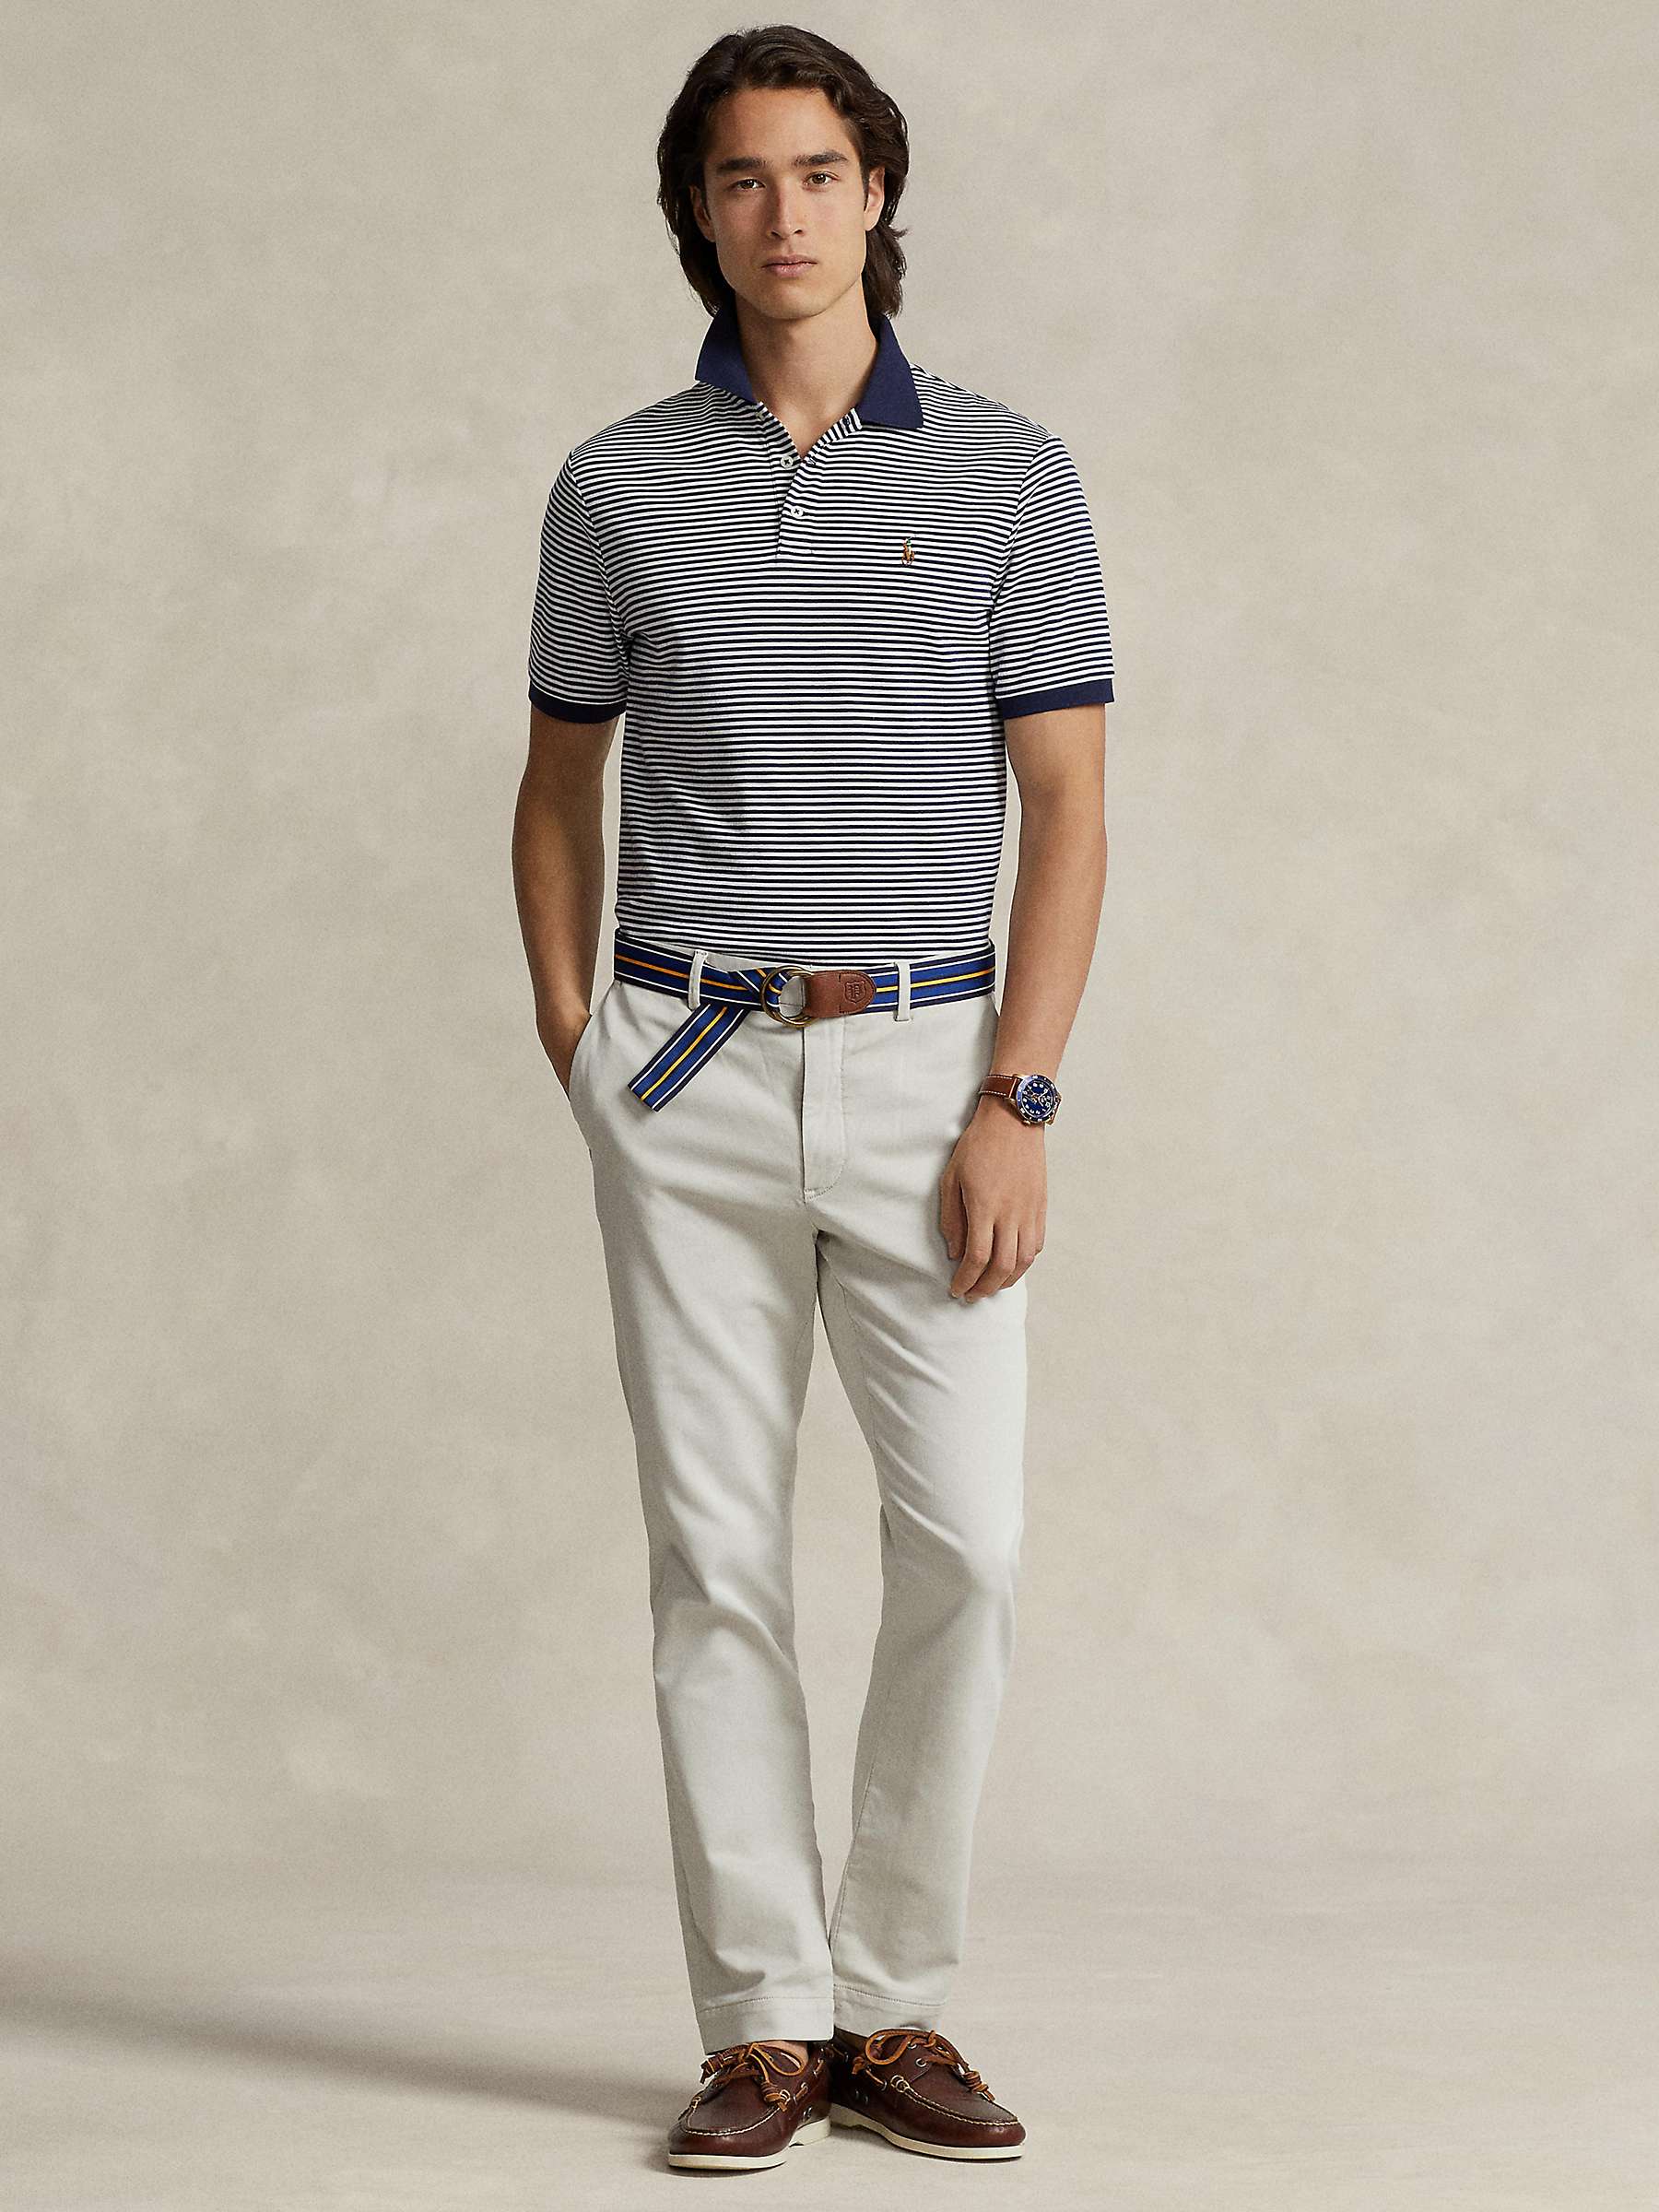 Buy Polo Ralph Lauren Short Sleeve Striped Polo Shirt, Refined Navy/White Online at johnlewis.com